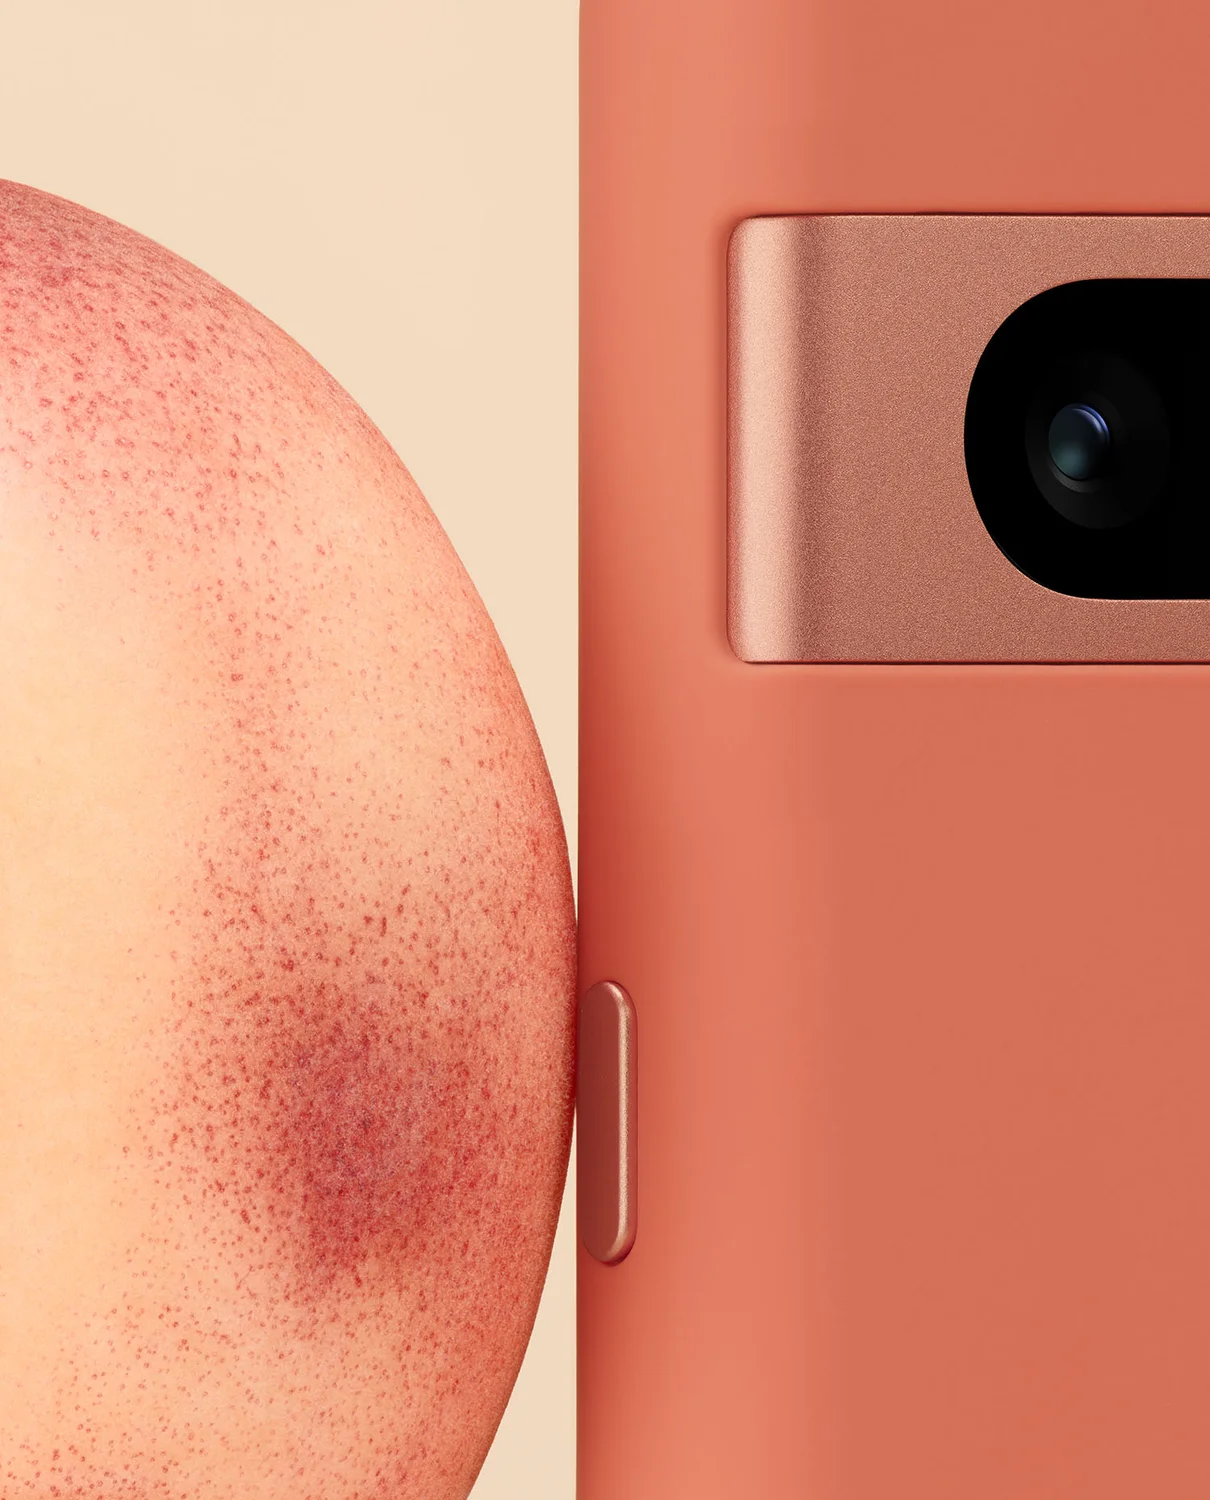 A photo showing the side of a Pixel 7a in Coral next to the skin of a peach, showing their corresponding colors.